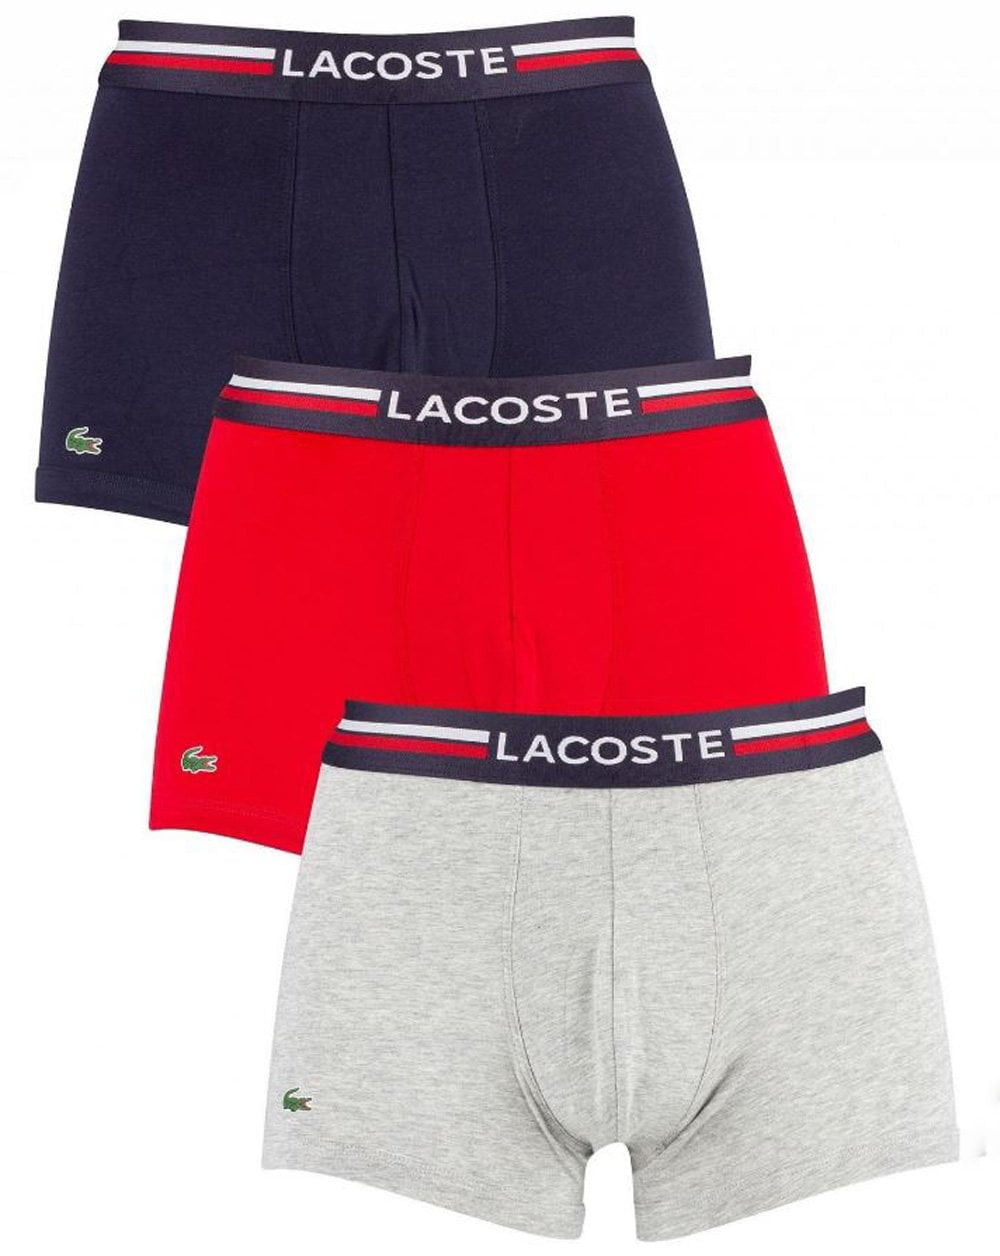 Grey/Red/Navy Lacoste Colours Collection 3 Pack Cotton Stretch Boxer Trunks 